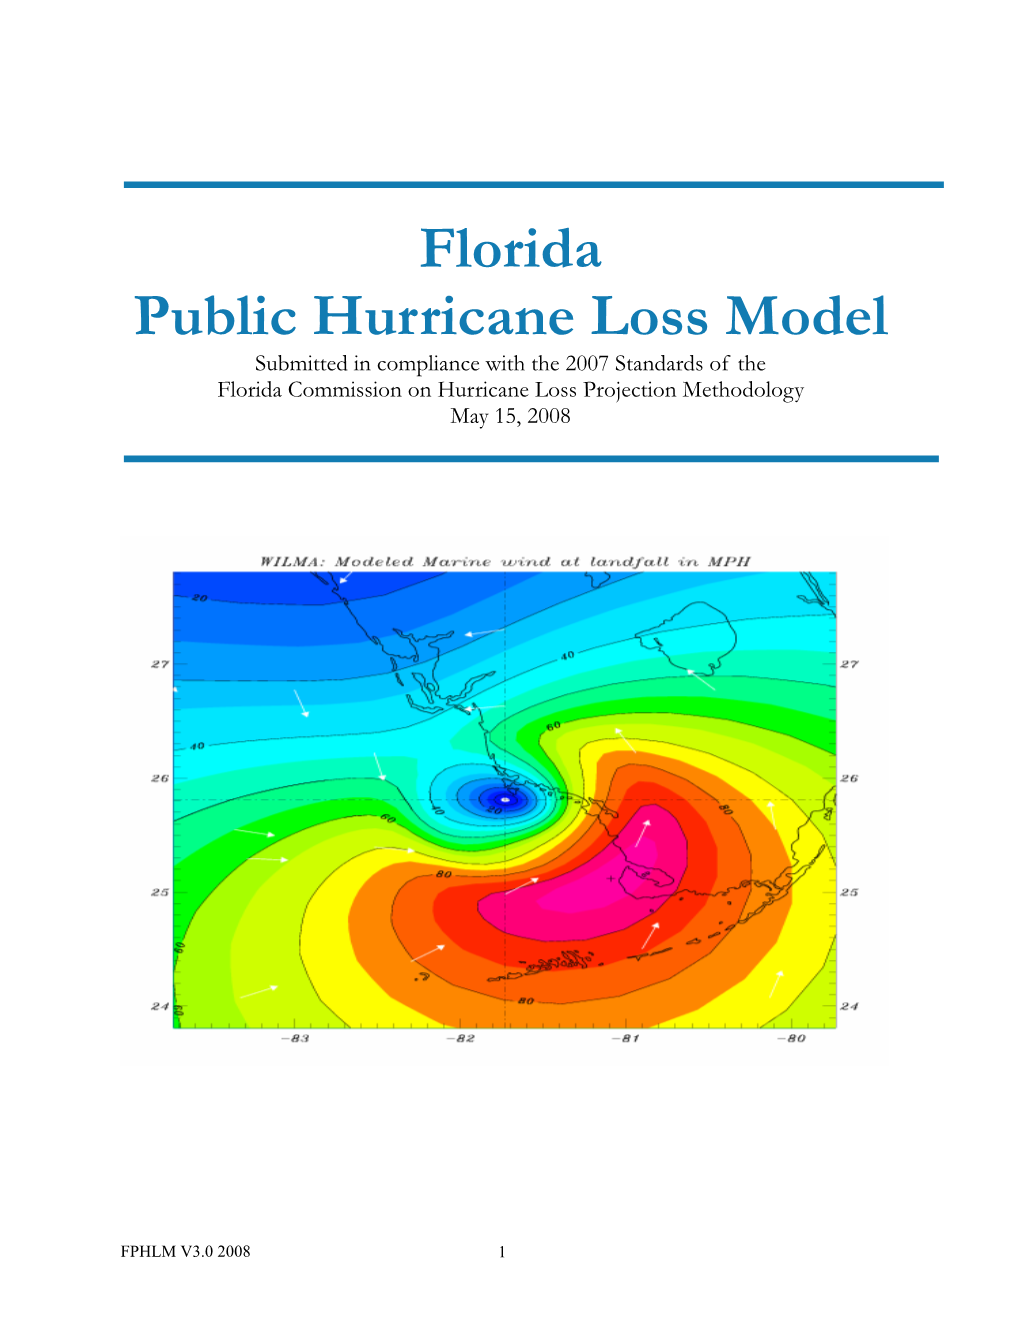 Florida Public Hurricane Loss Model Submitted in Compliance with the 2007 Standards of the Florida Commission on Hurricane Loss Projection Methodology May 15, 2008